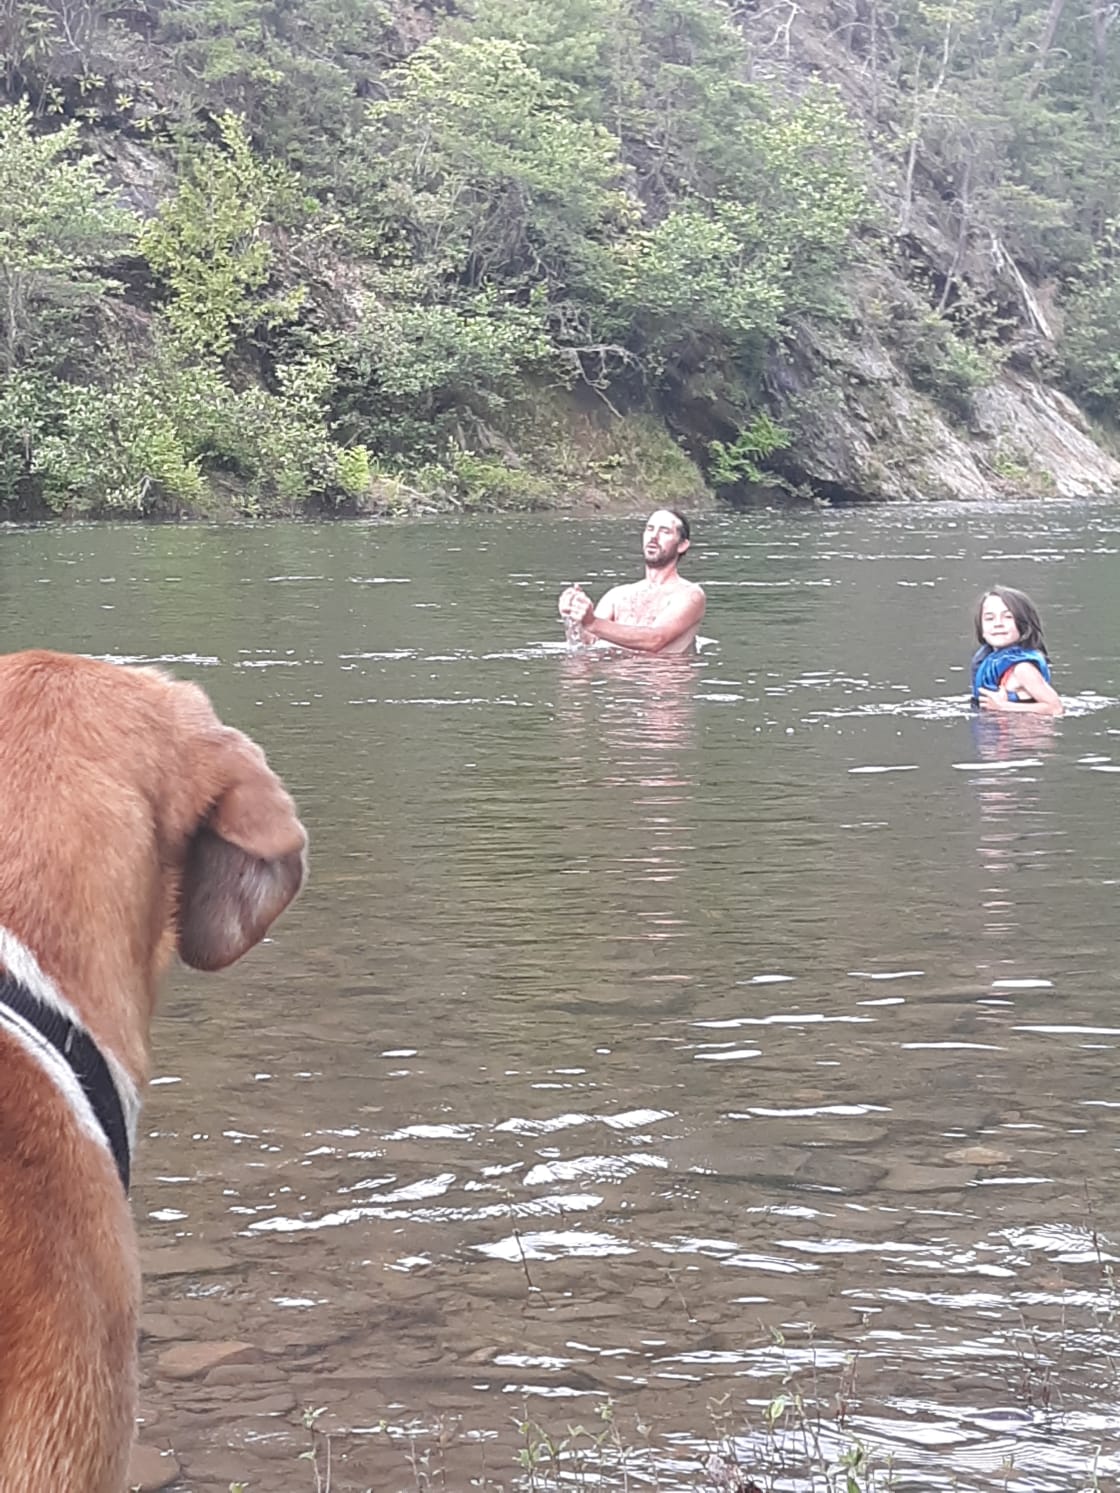 Cooling off in the river